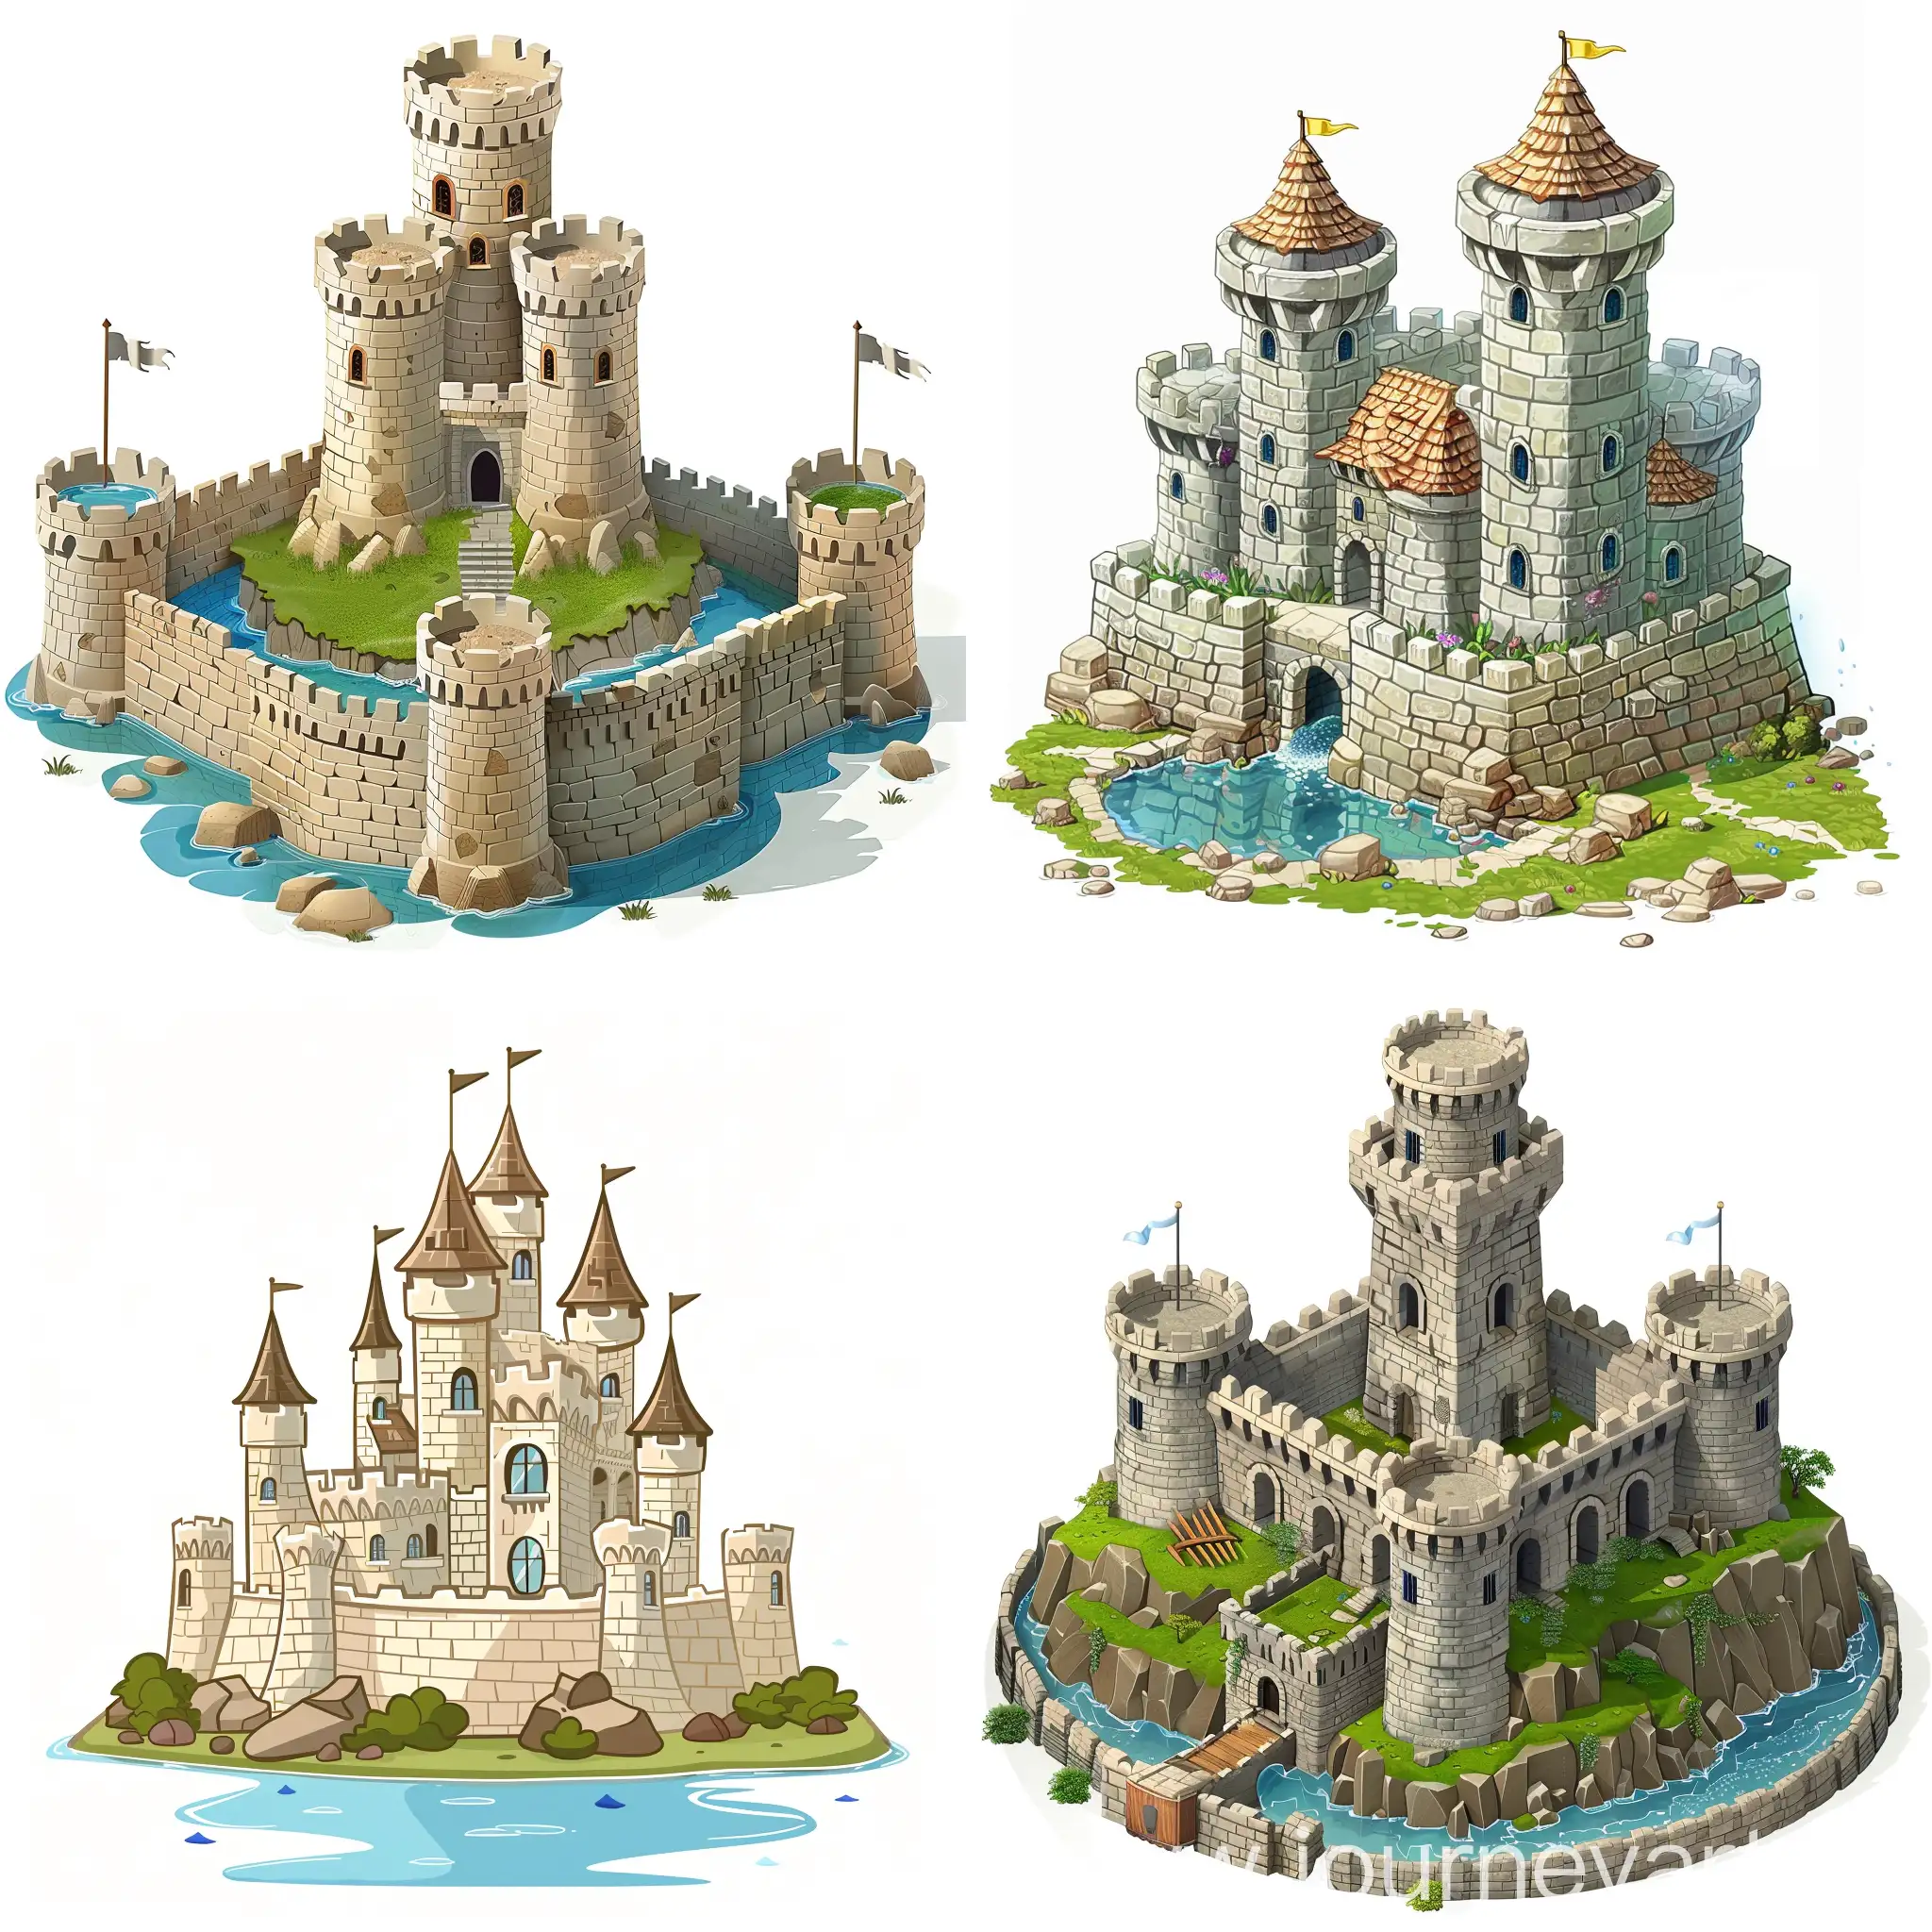 Fantasy-Cartoon-Castle-with-Moat-on-White-Background